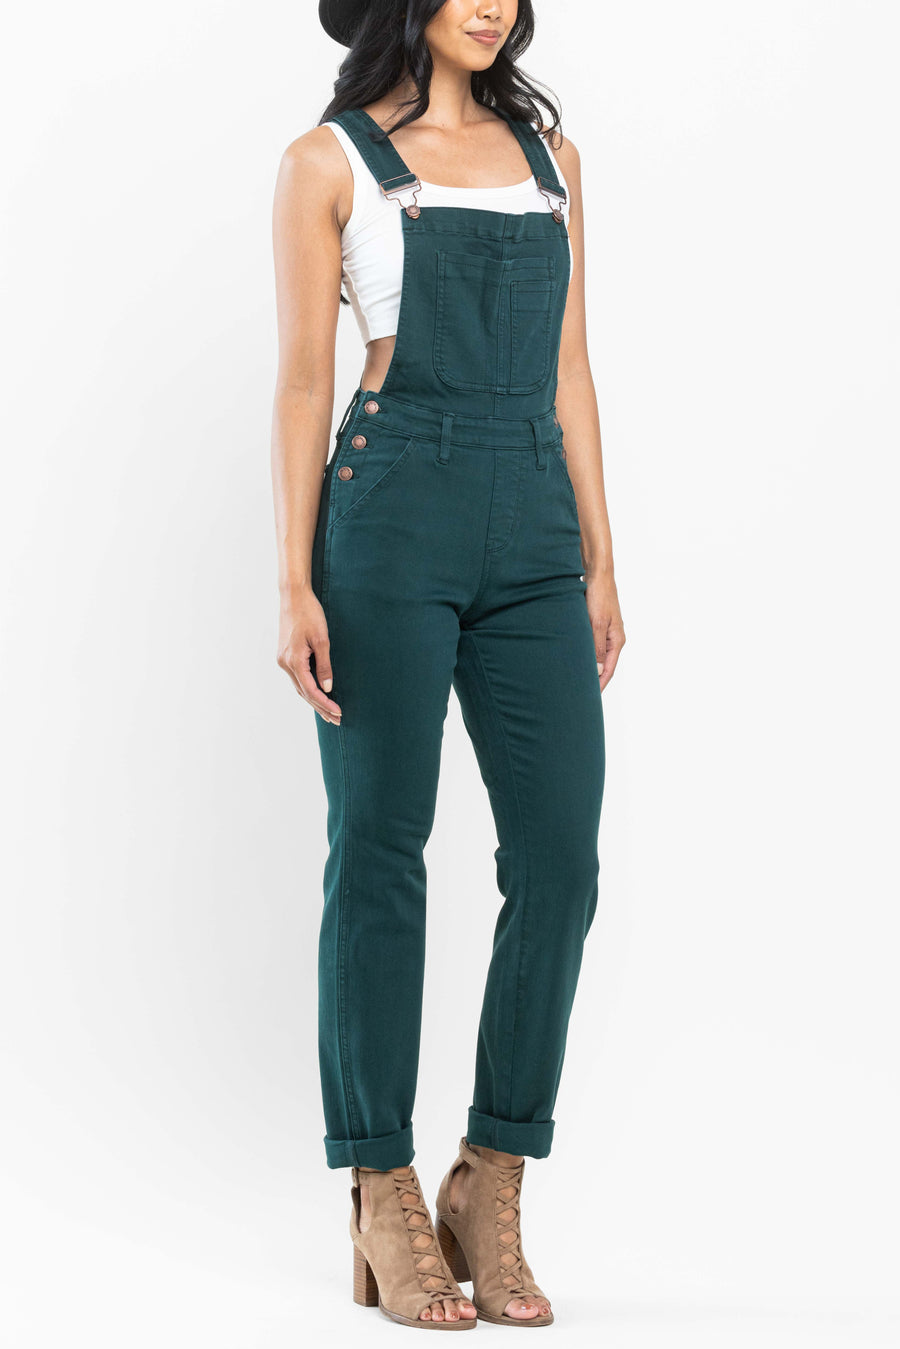 Naelly Teal Double Cuff Boyfriend Overall